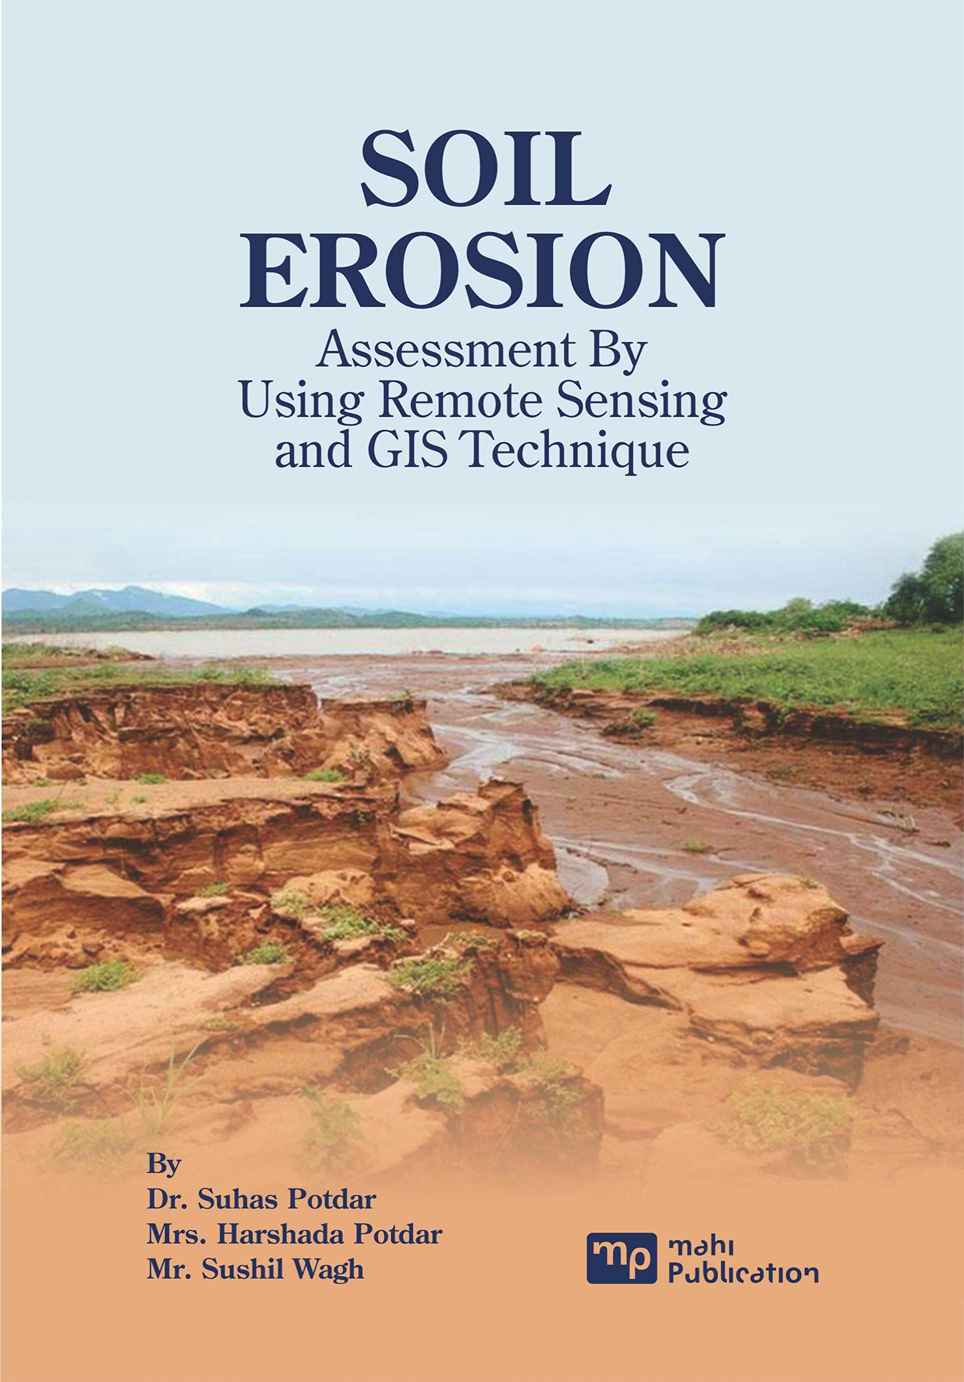 Soil Erosion Assessment by Using Remote Sensing and GIS Technique